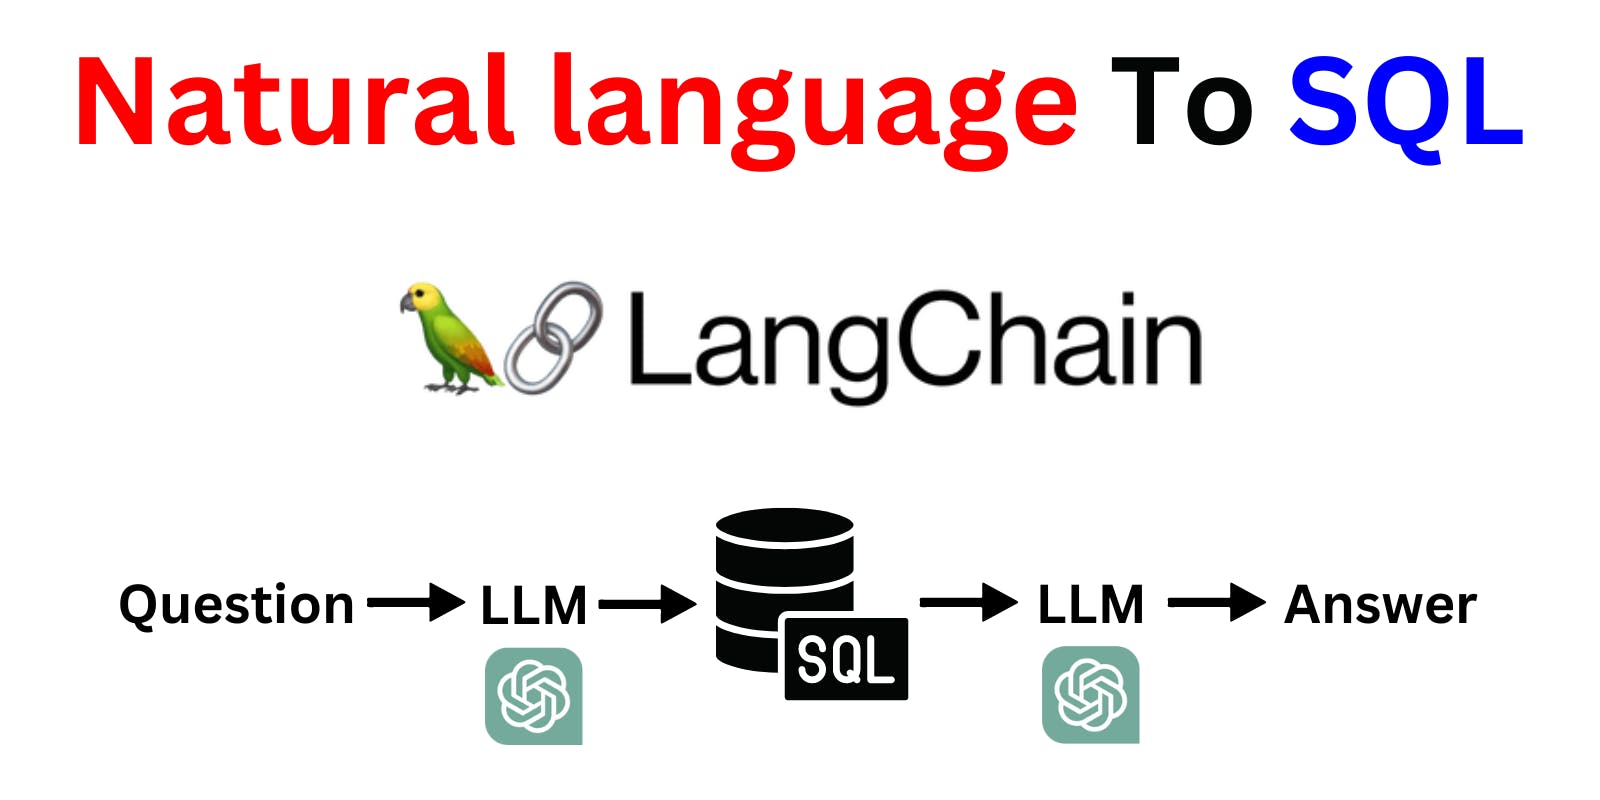 Mastering Natural Language to SQL with LangChain | NL2SQL